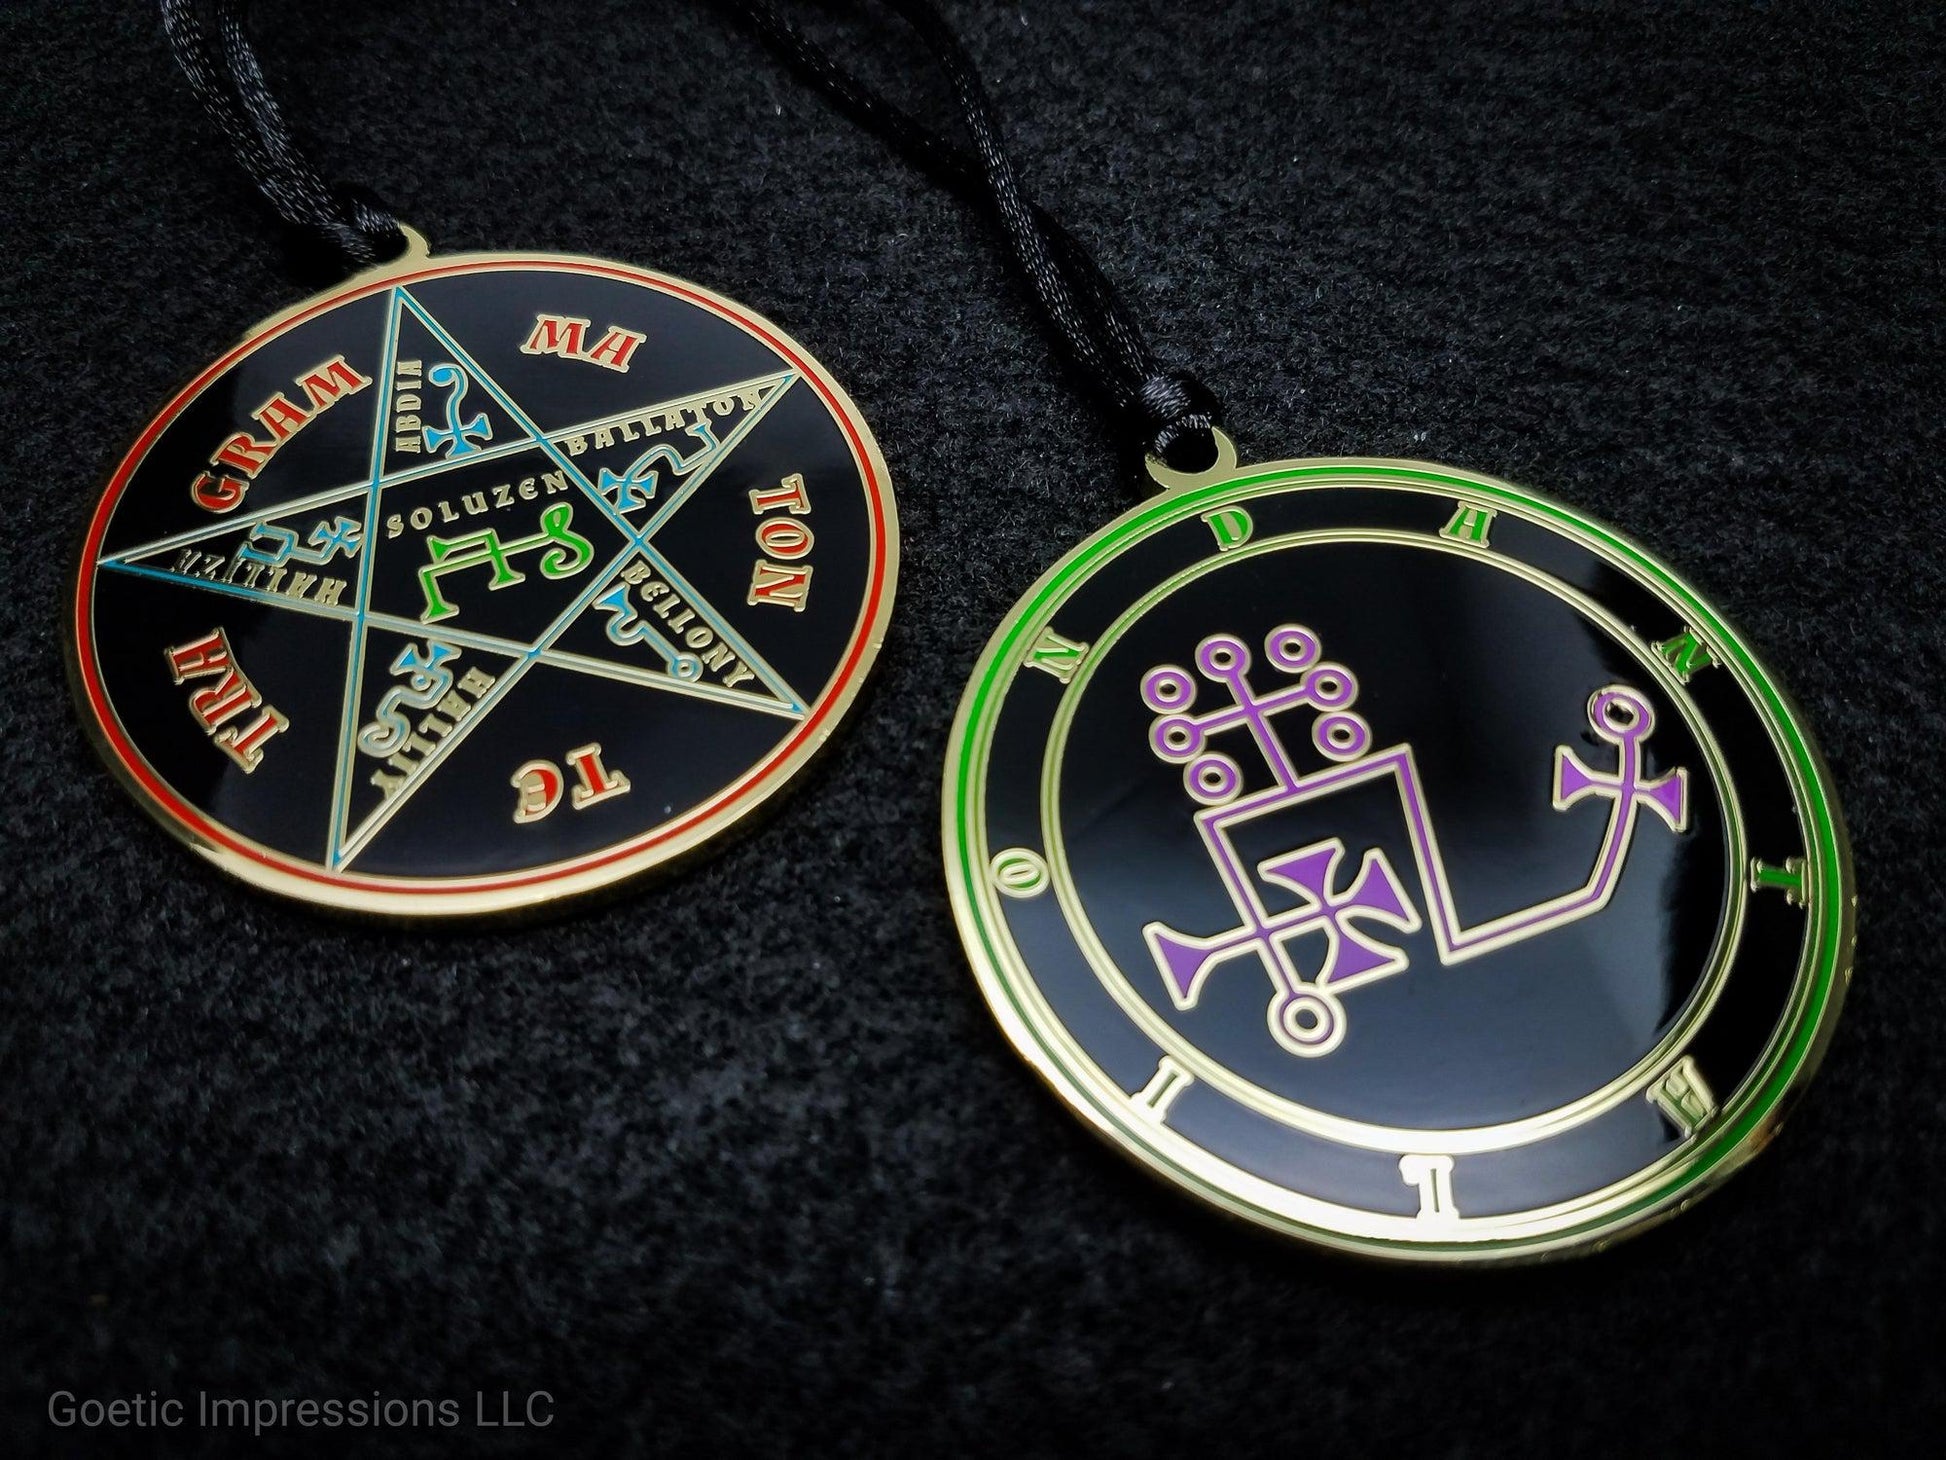 Seal of Dantalion sigil pendant with Pentacle of Solomon on reverse side